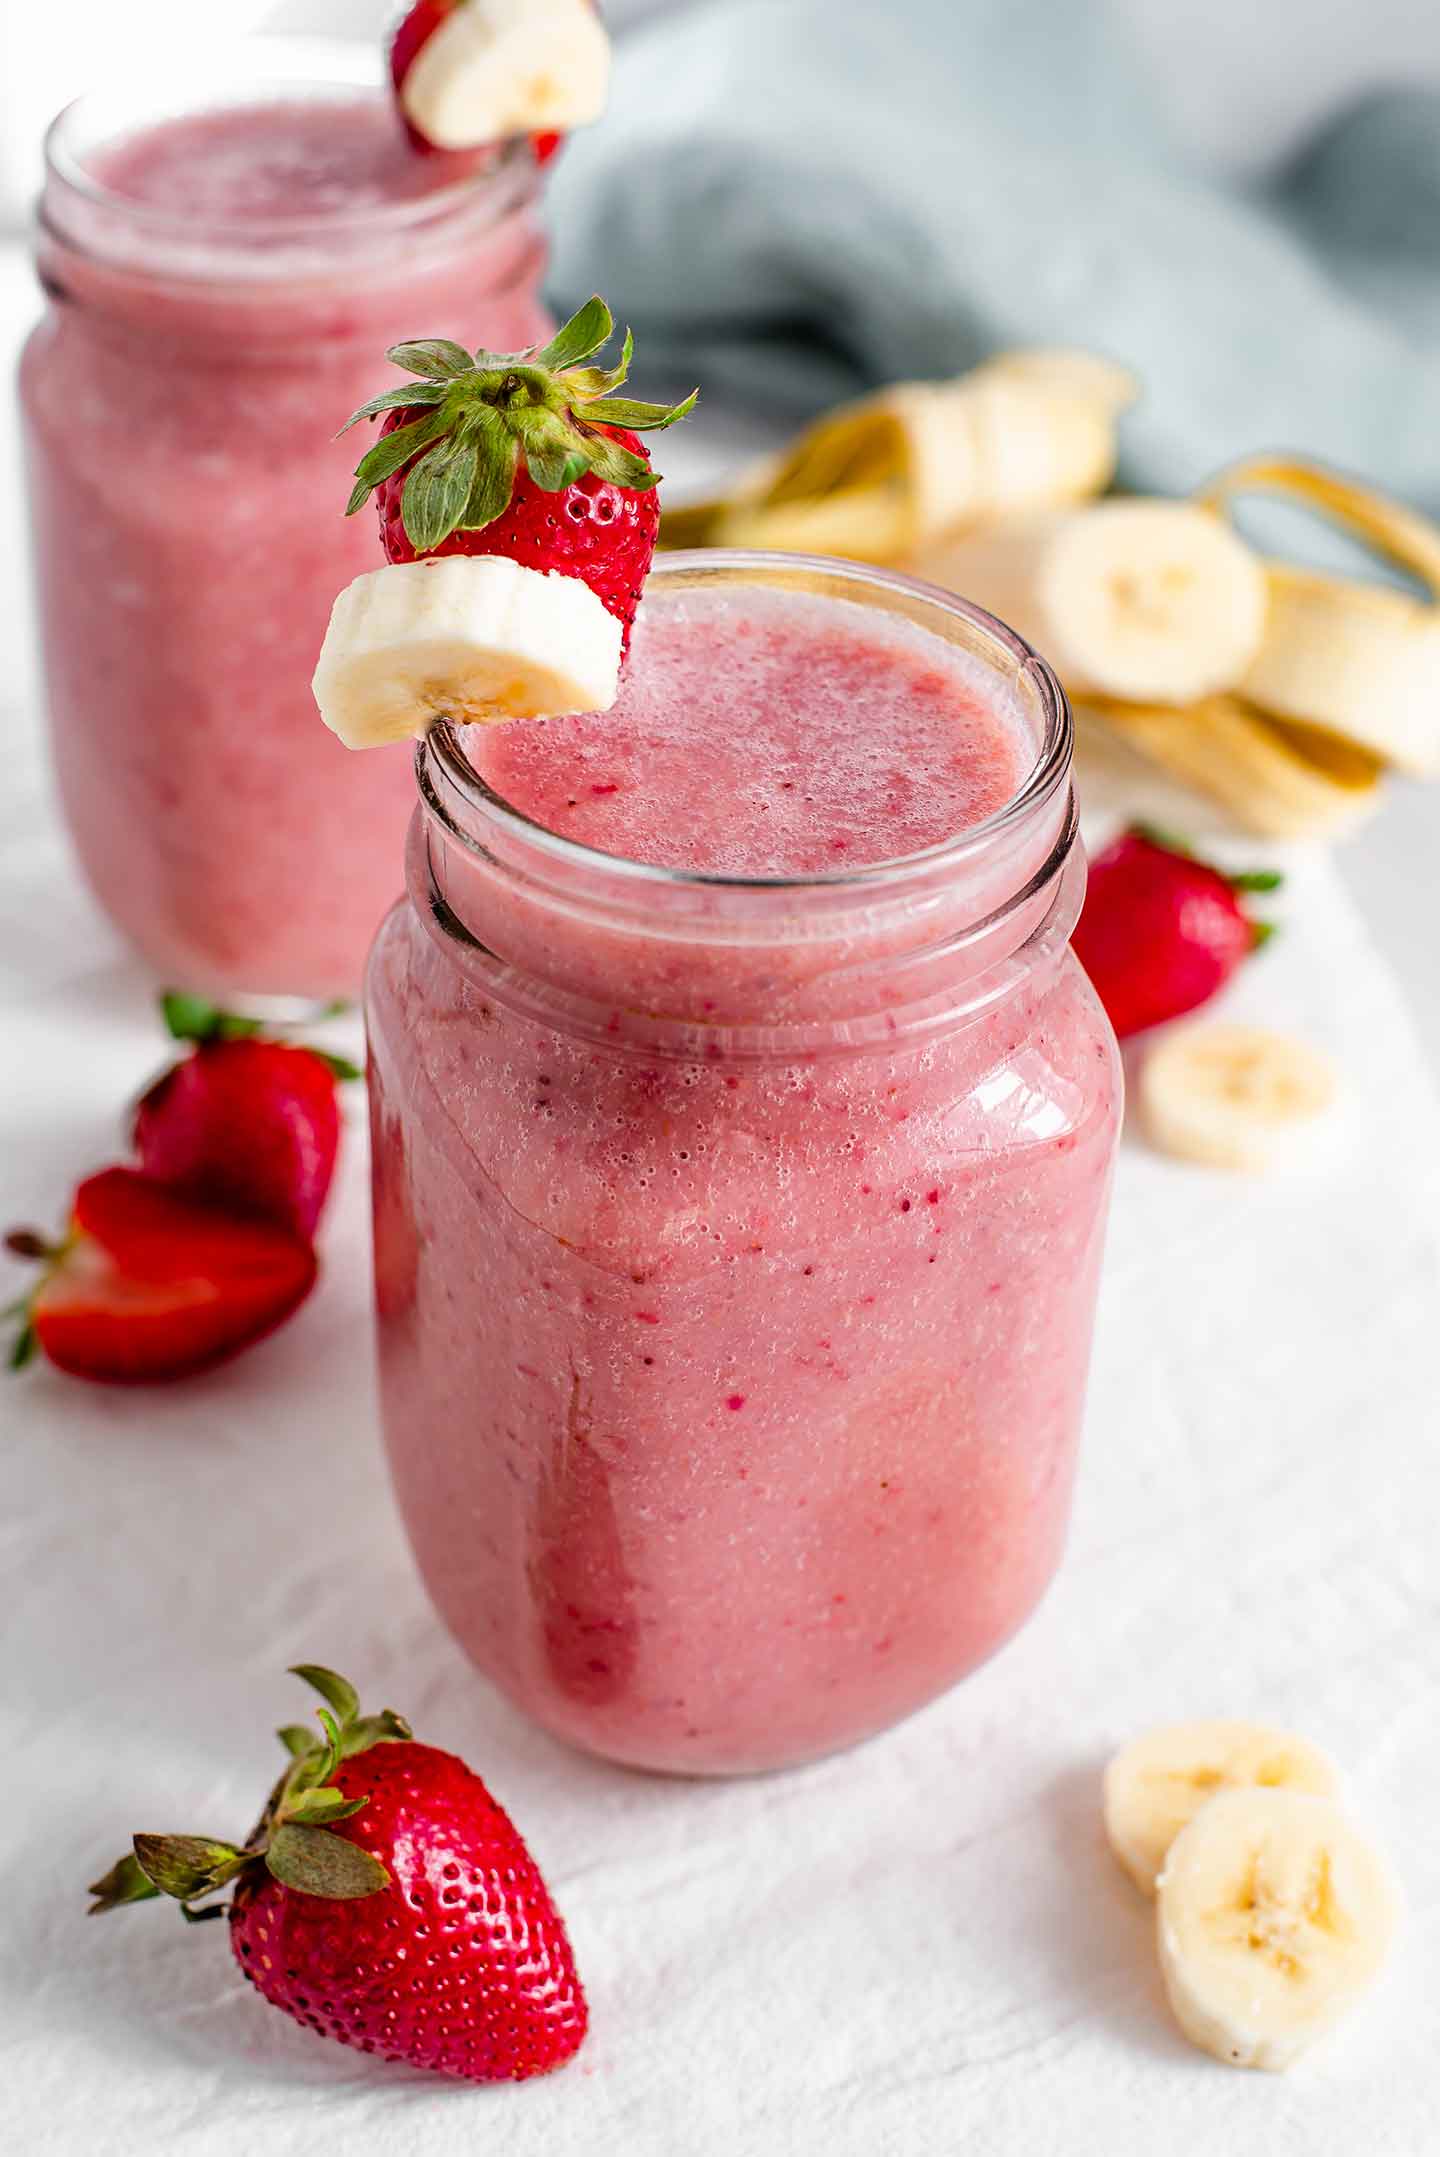 Strawberry Banana Smoothie - A Popular Favourite! • Tasty Thrifty Timely